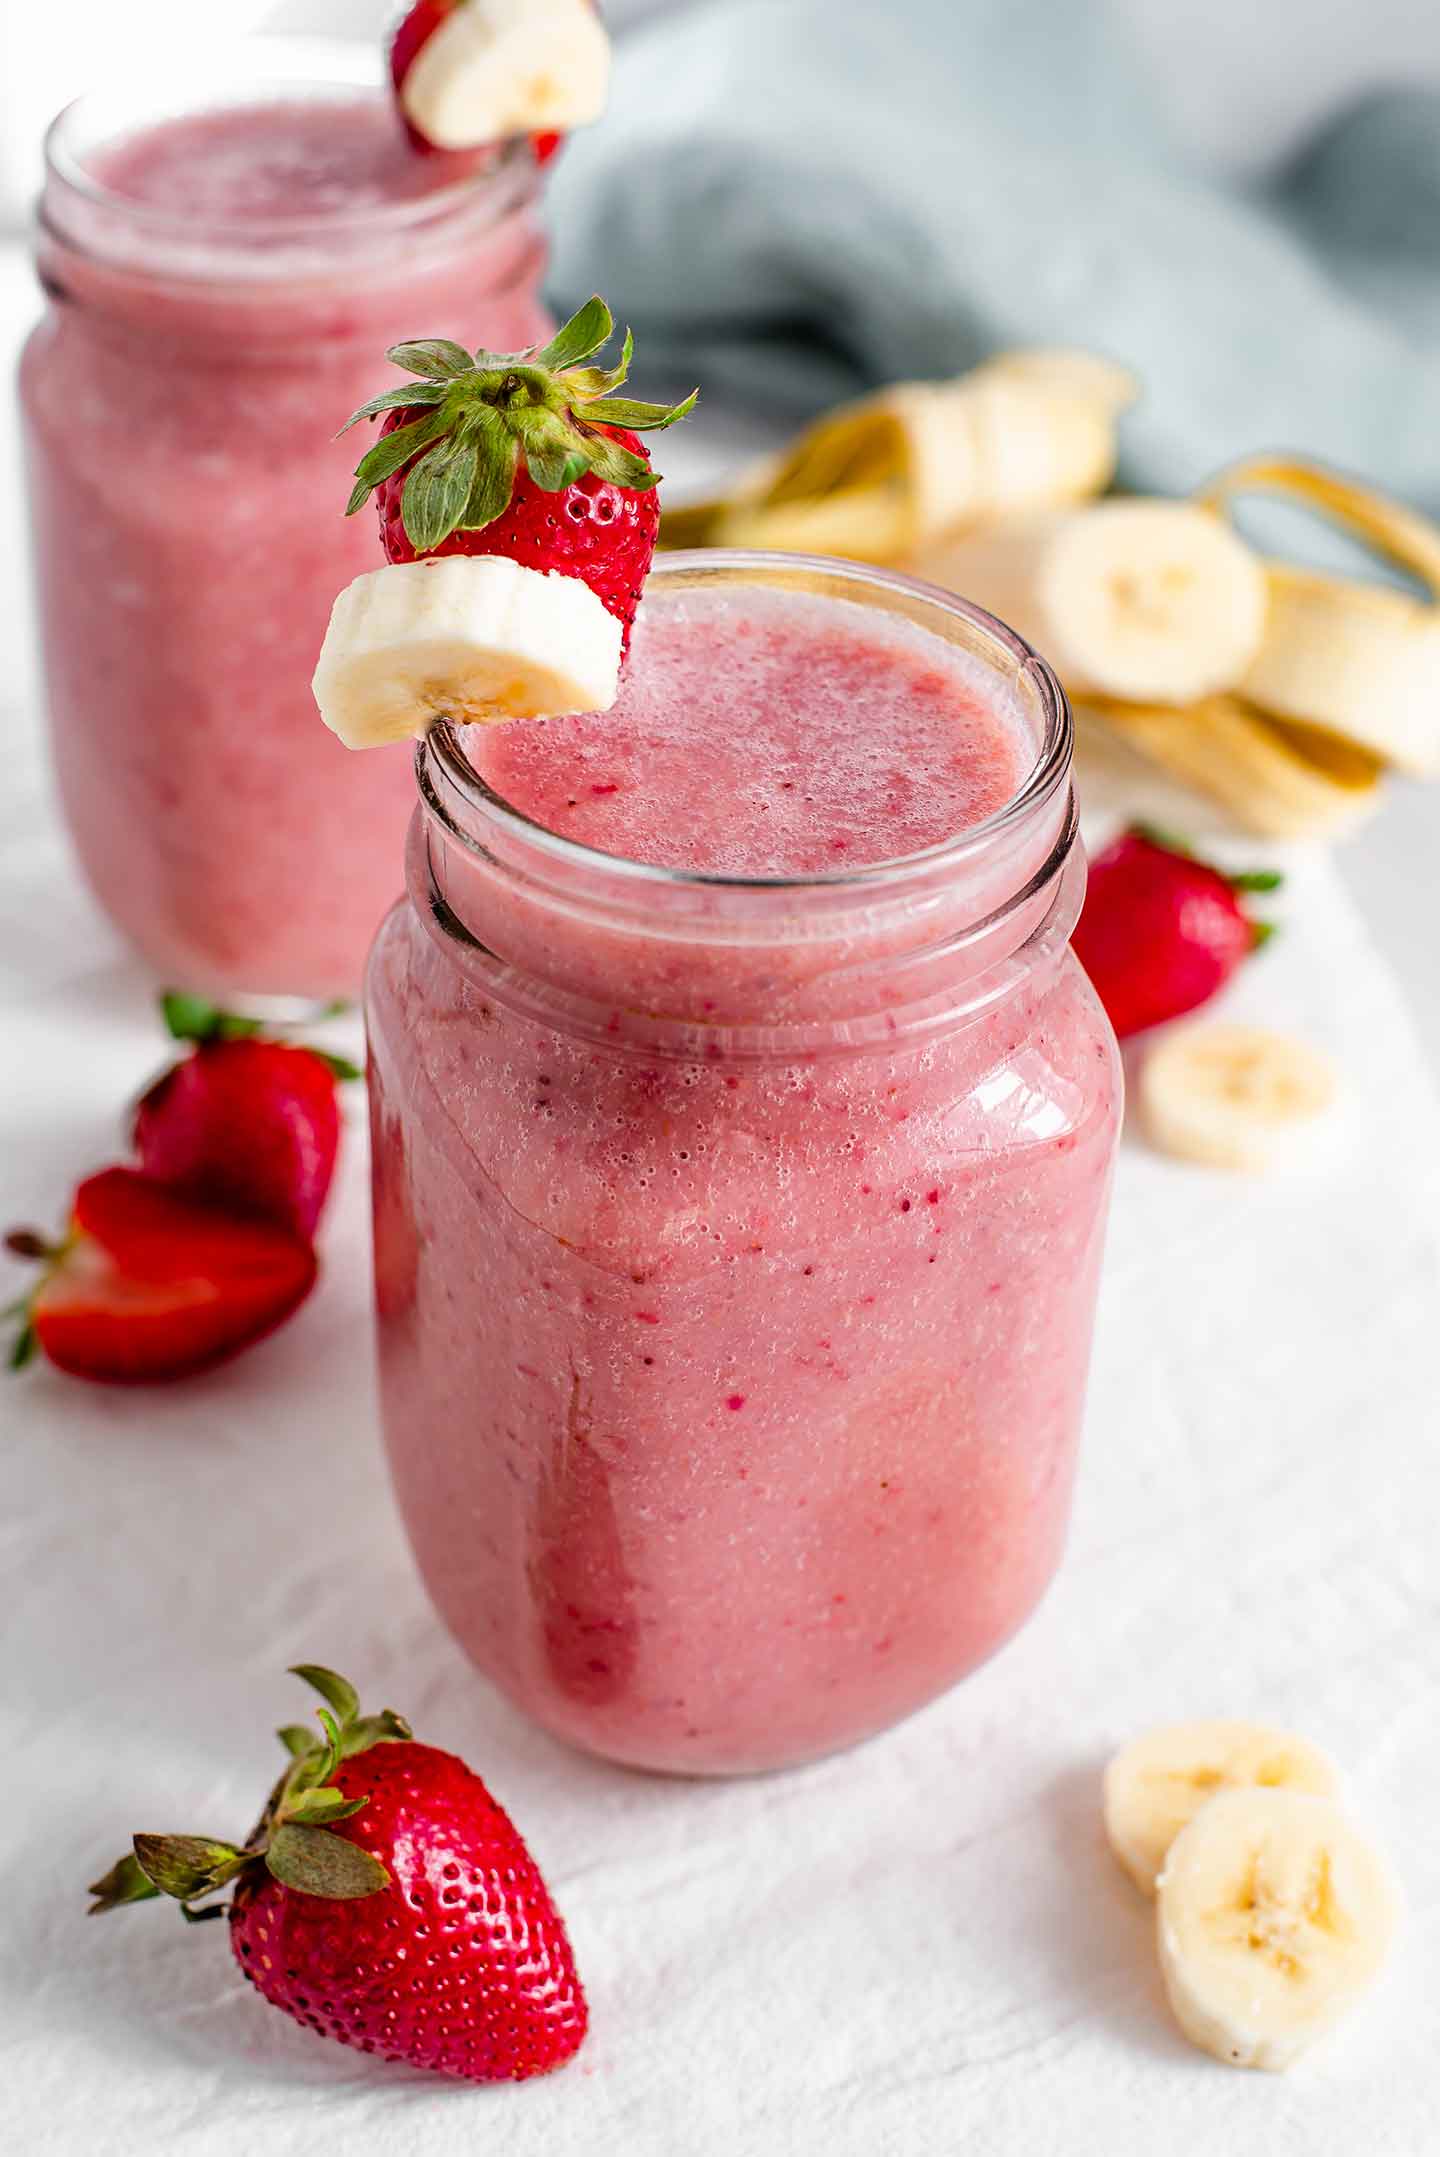 Strawberry Banana Smoothie - A Popular Favourite! • Tasty Thrifty Timely